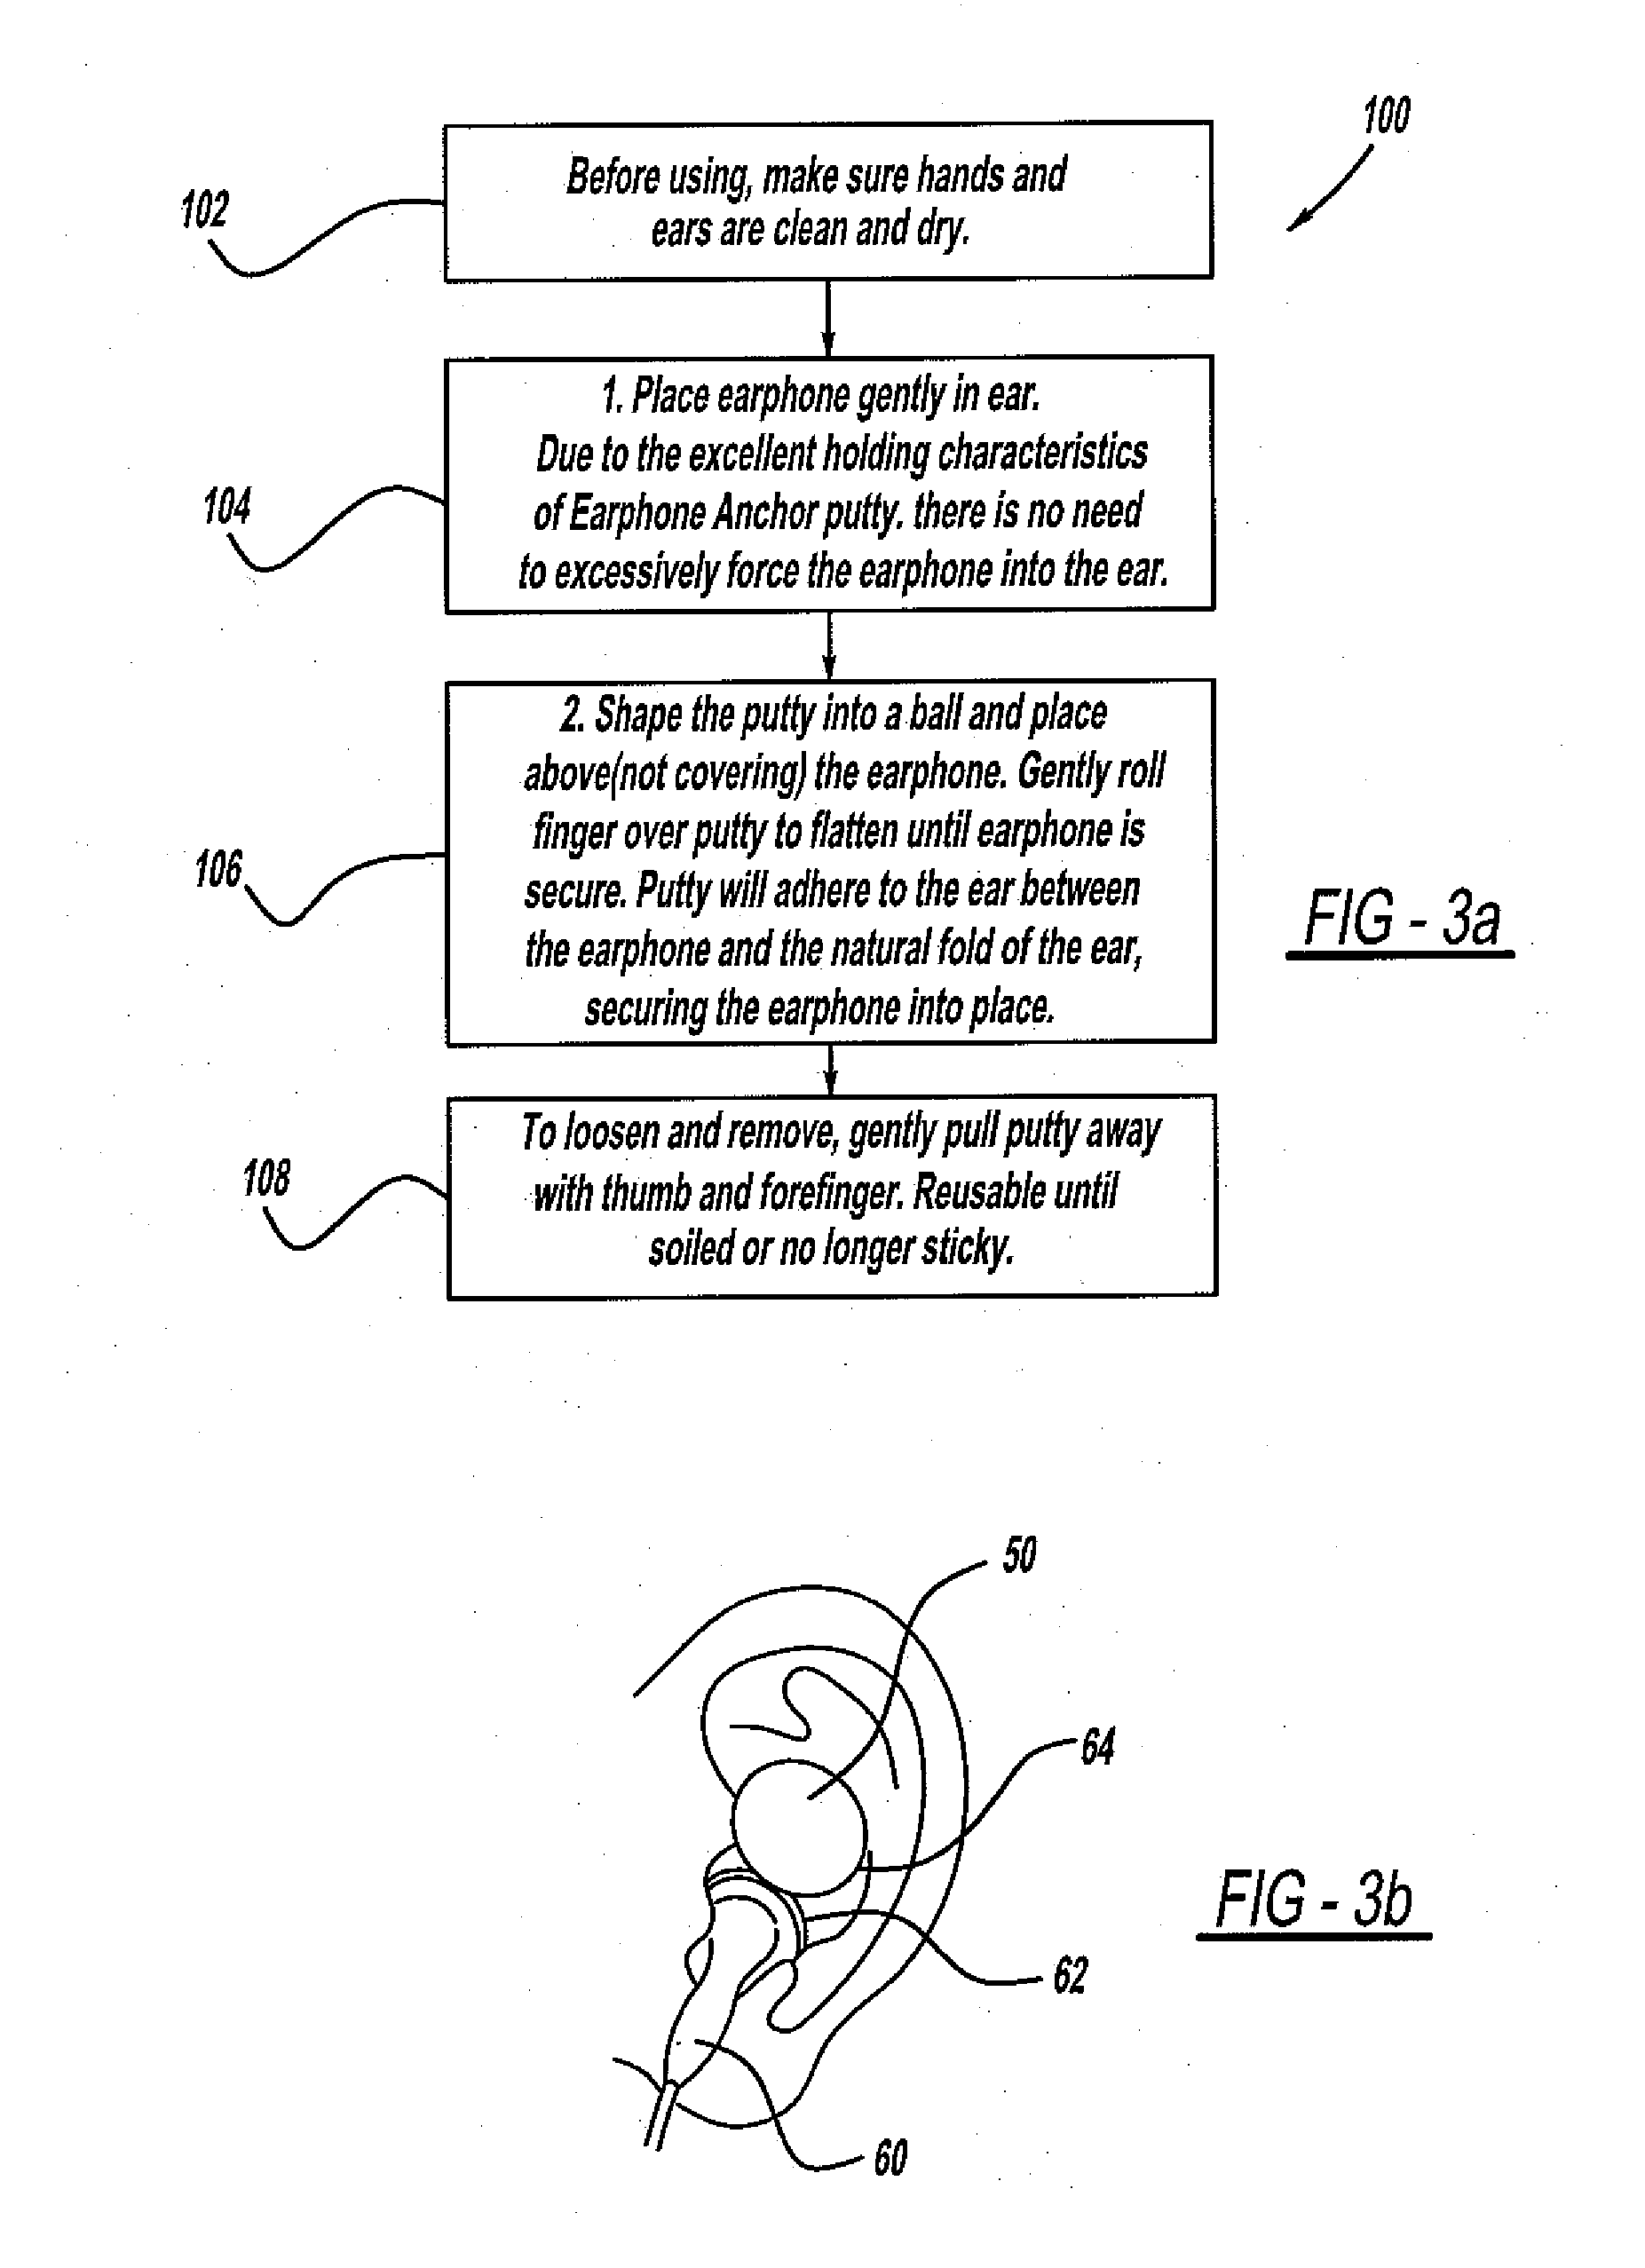 Apparatus and method of anchoring an ear piece